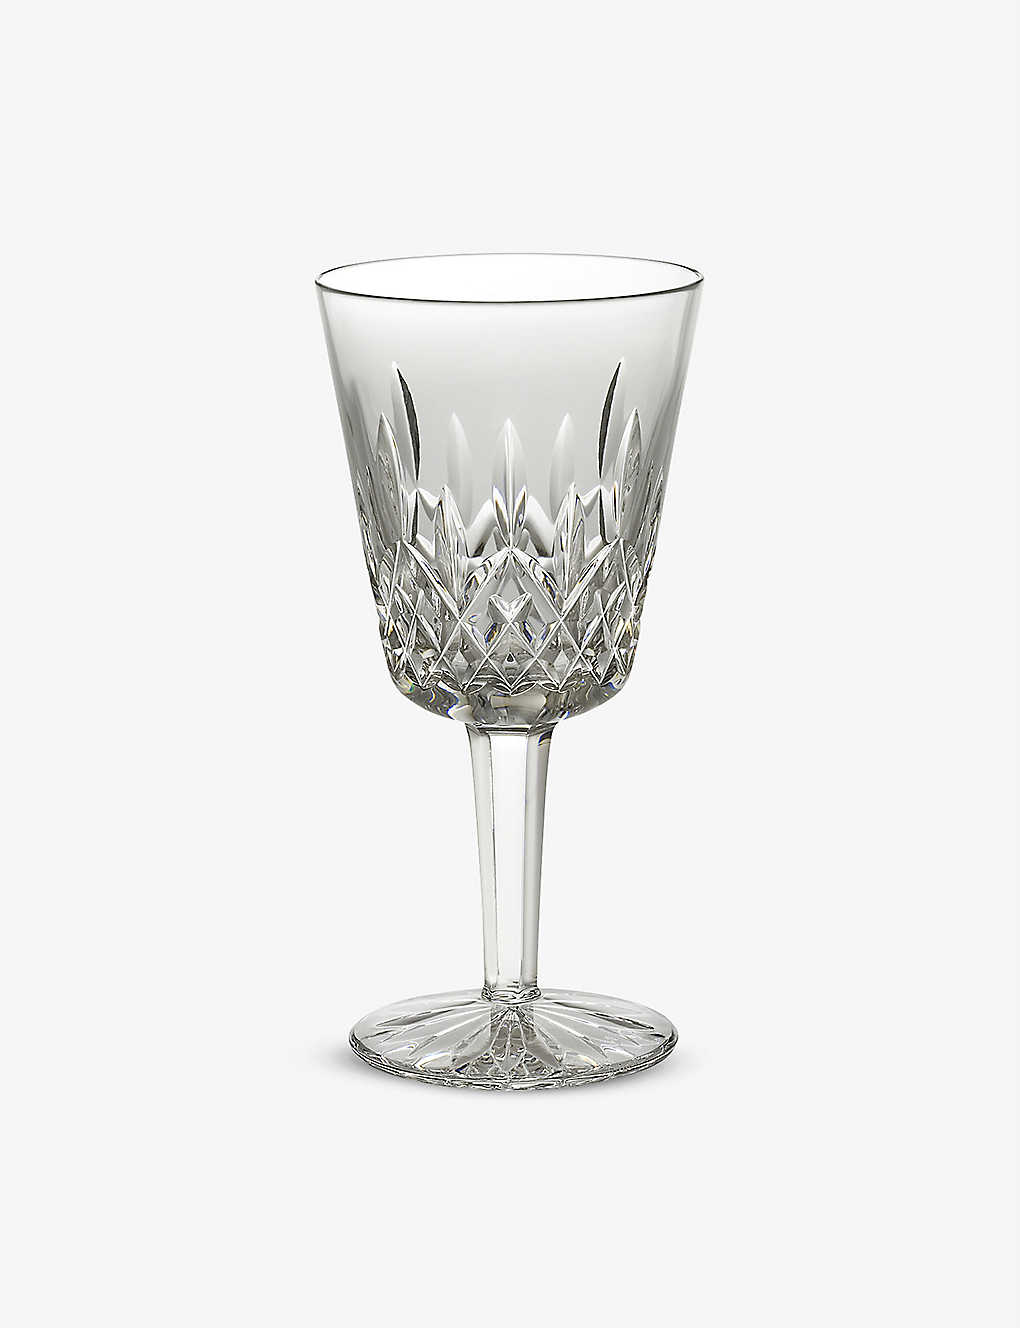 WATERFORD リズモア グラス ゴブレット 17.5cm Lismore glass goblet 17.5cm